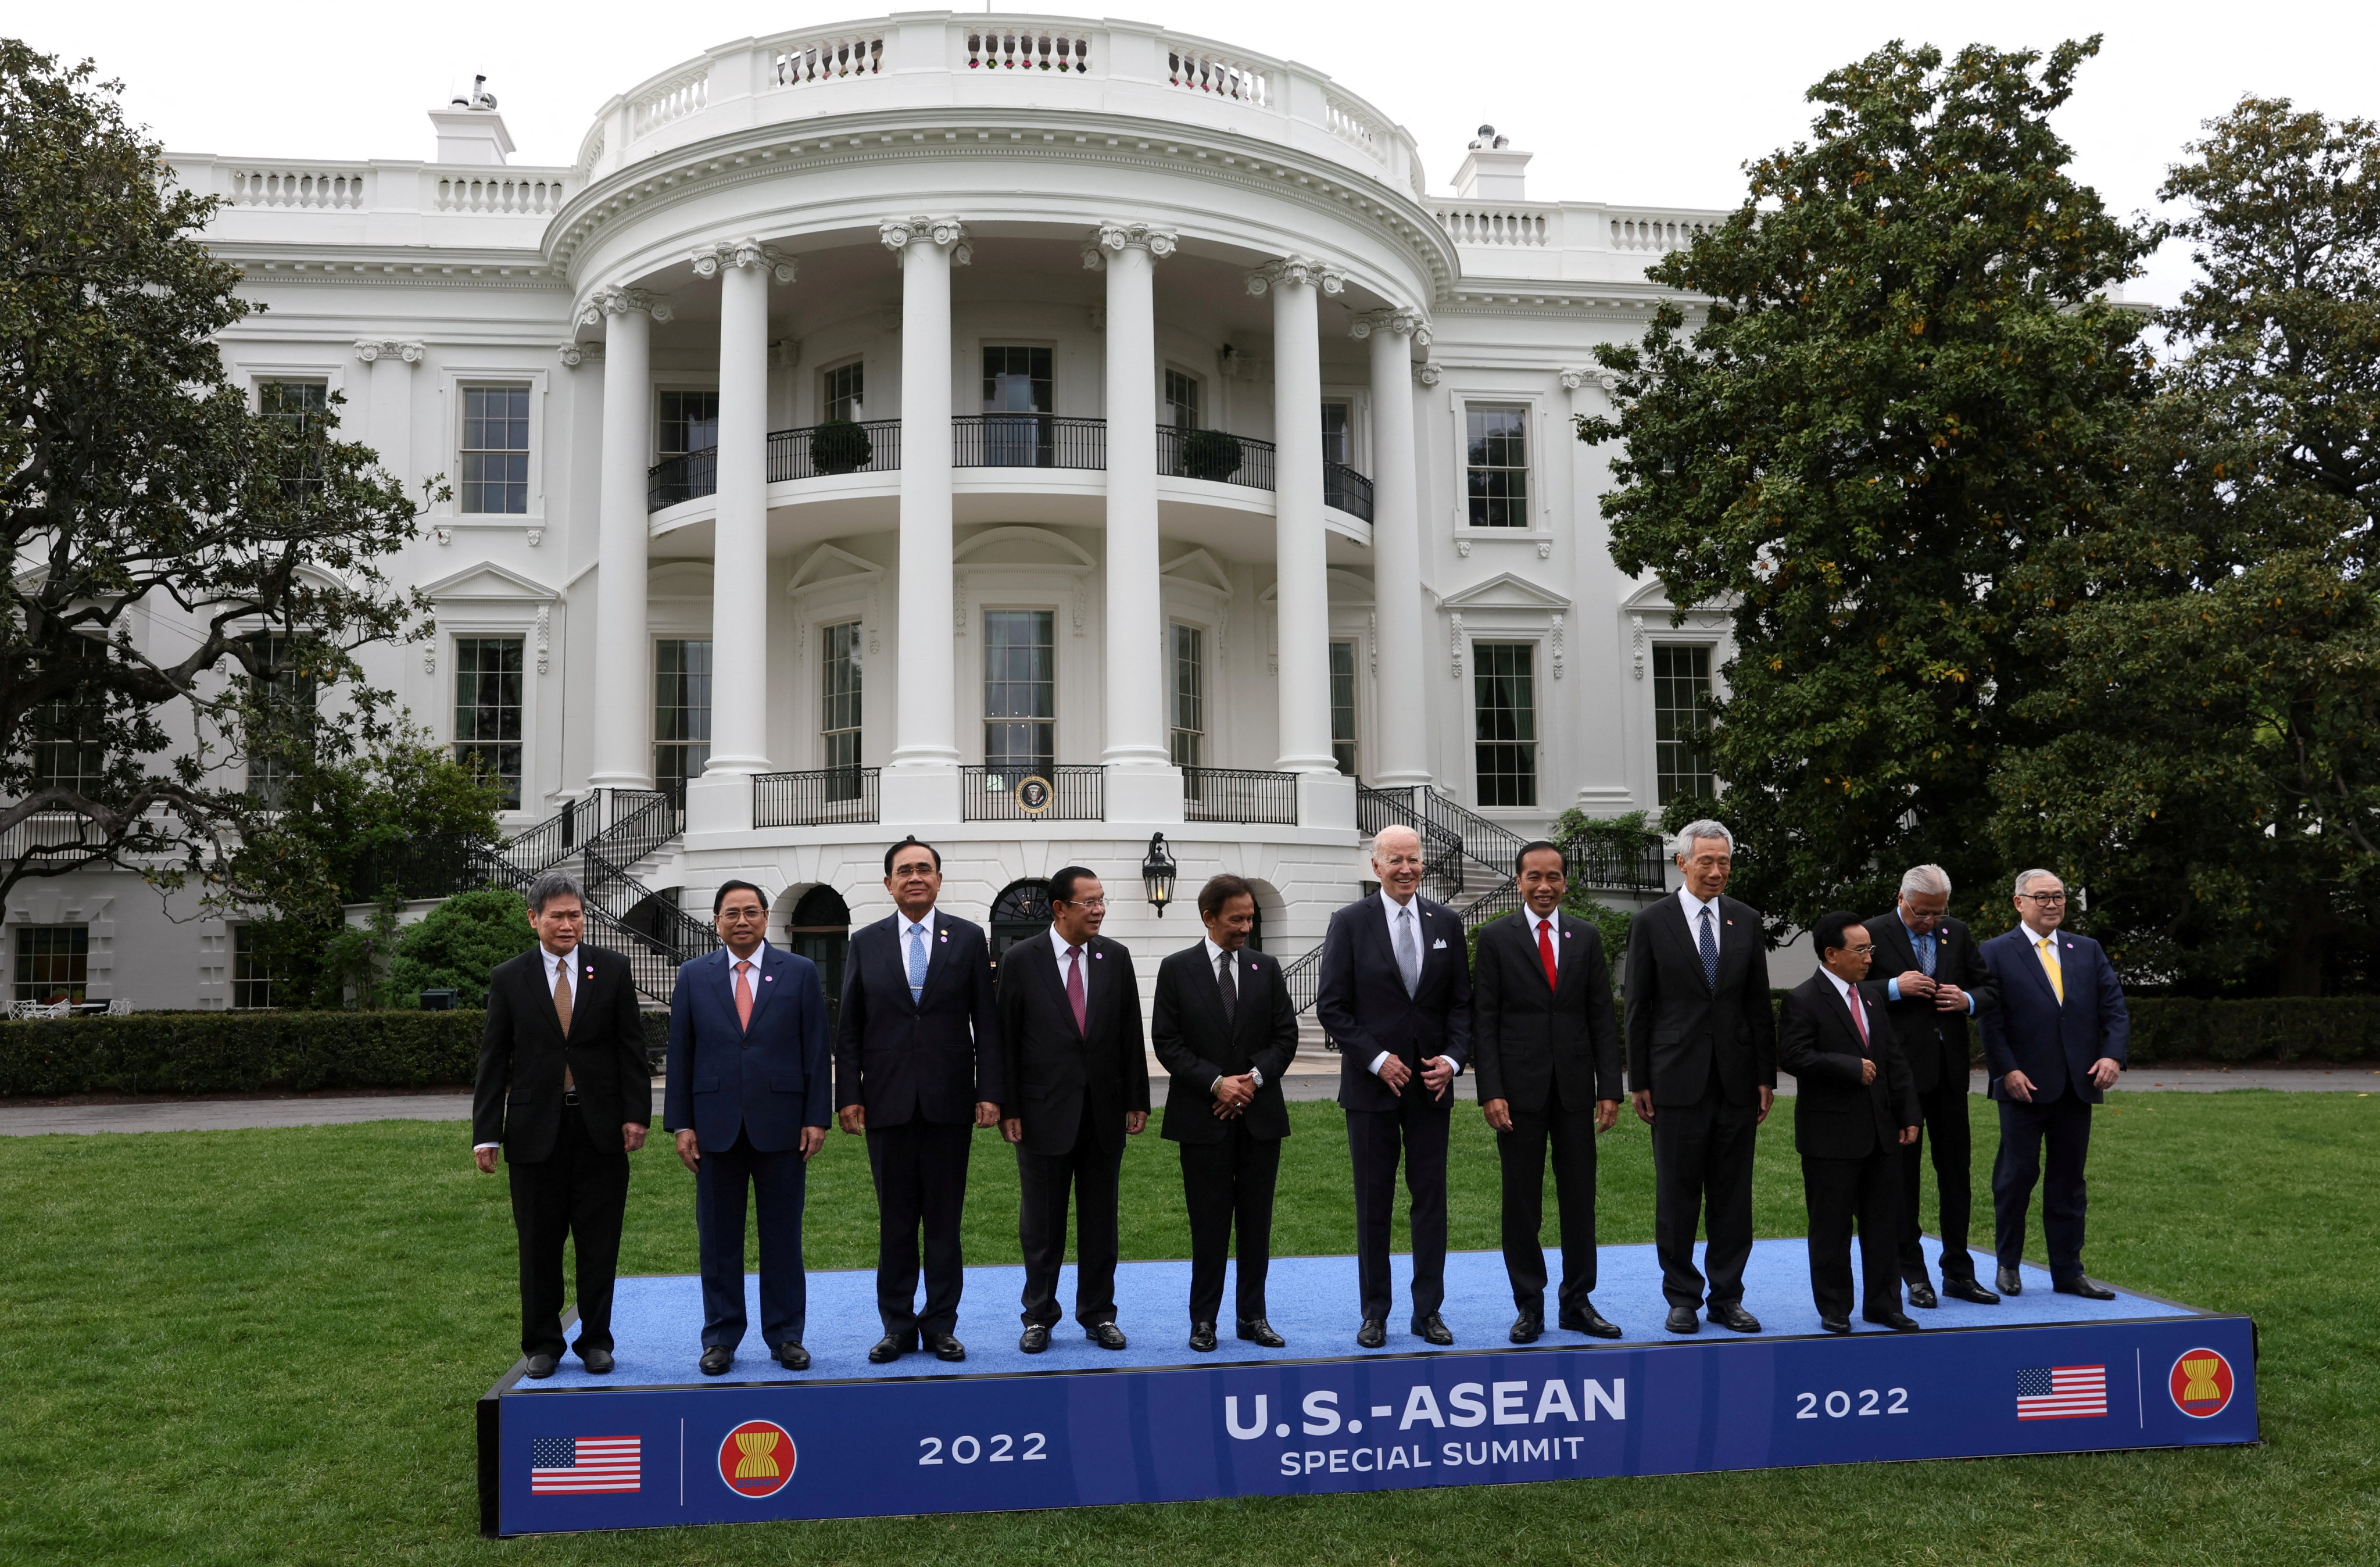 US President Joe Biden poses for a group photograph with Asean leaders during a special US-Asean summit at the White House in May last year. Photo: Reuters